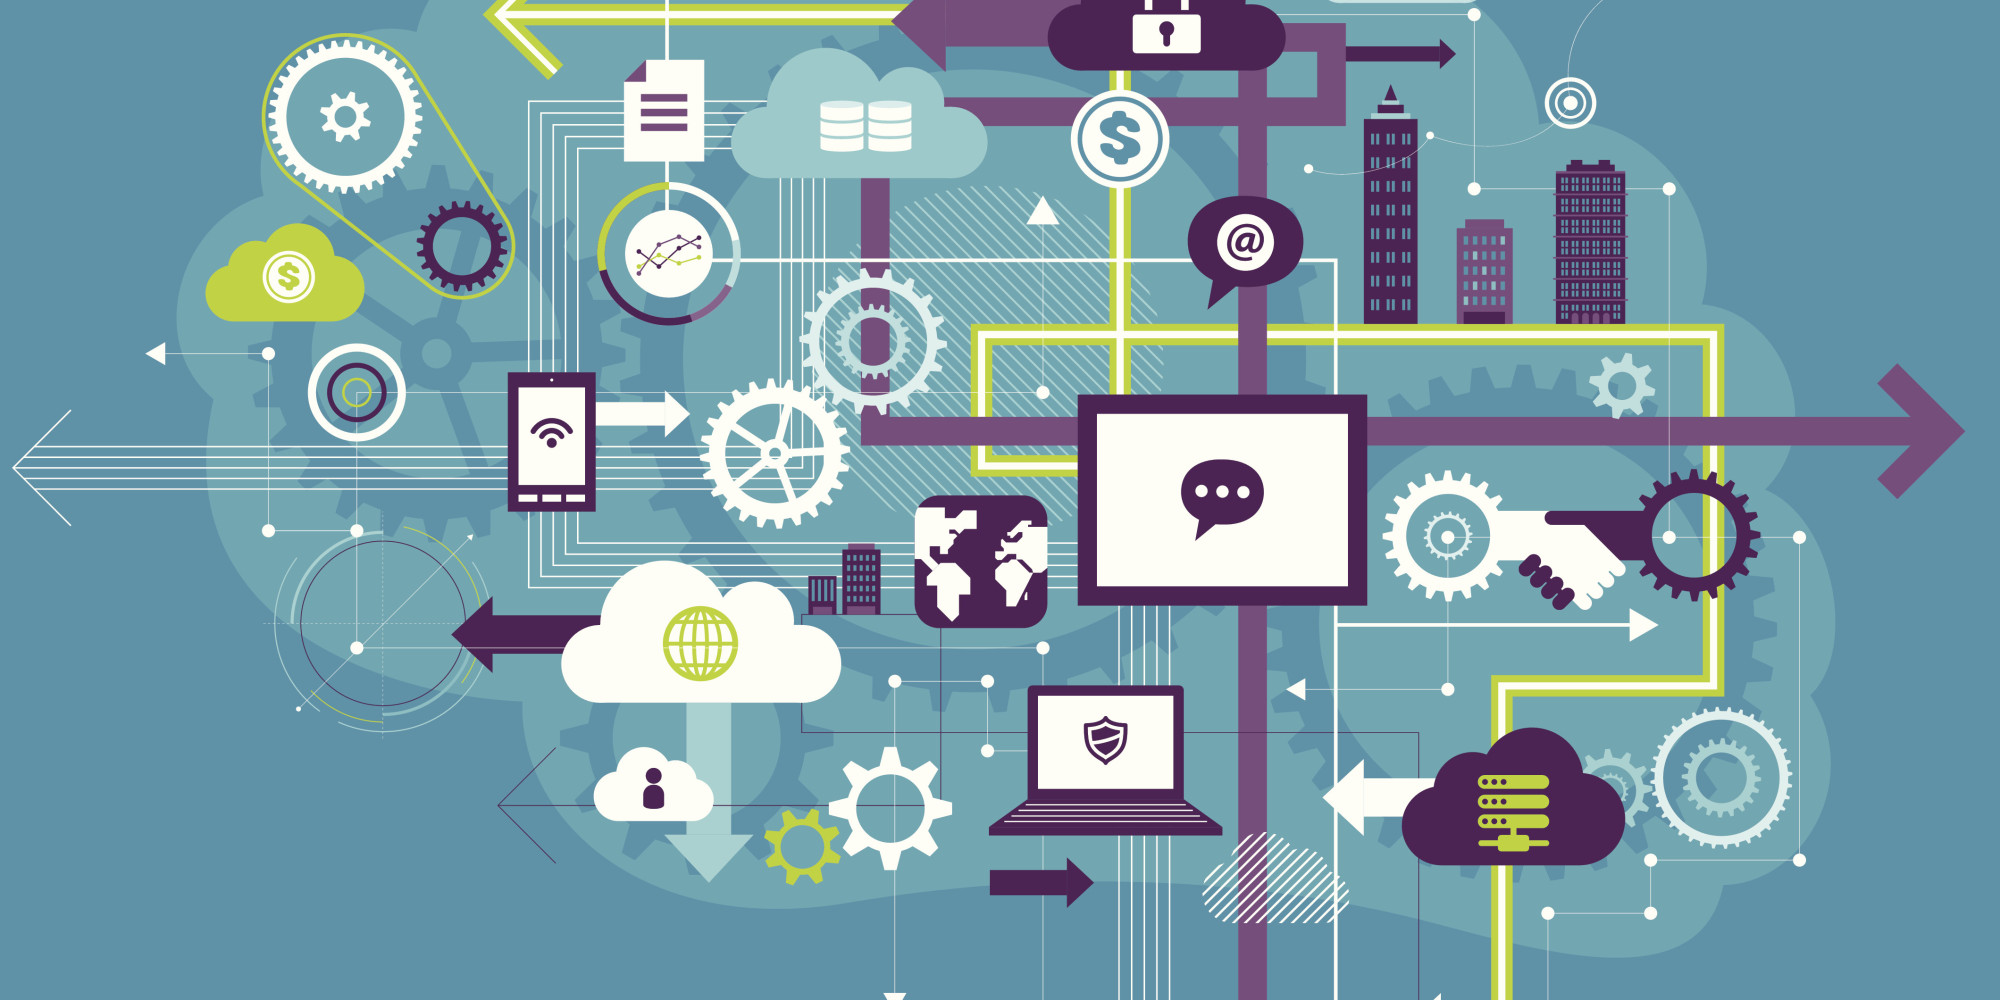 Why the IoT revolution needs telcos’ core skills